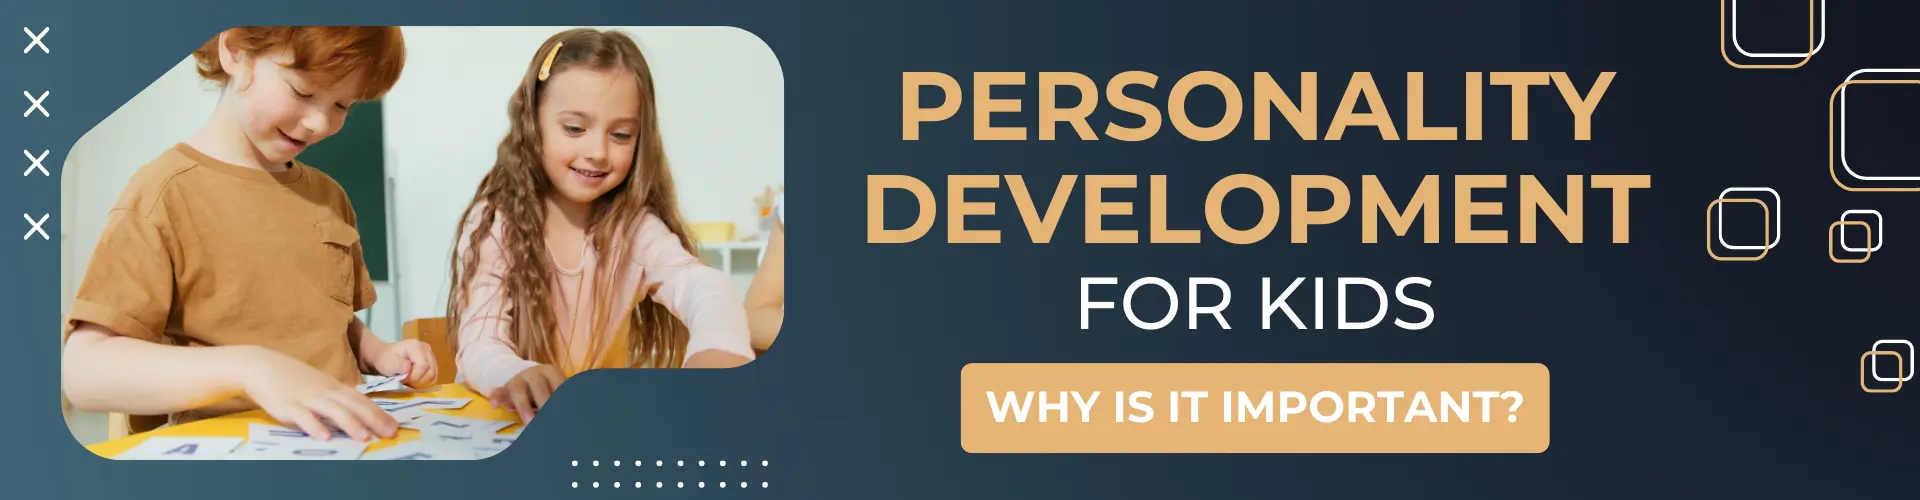 personality development for kids